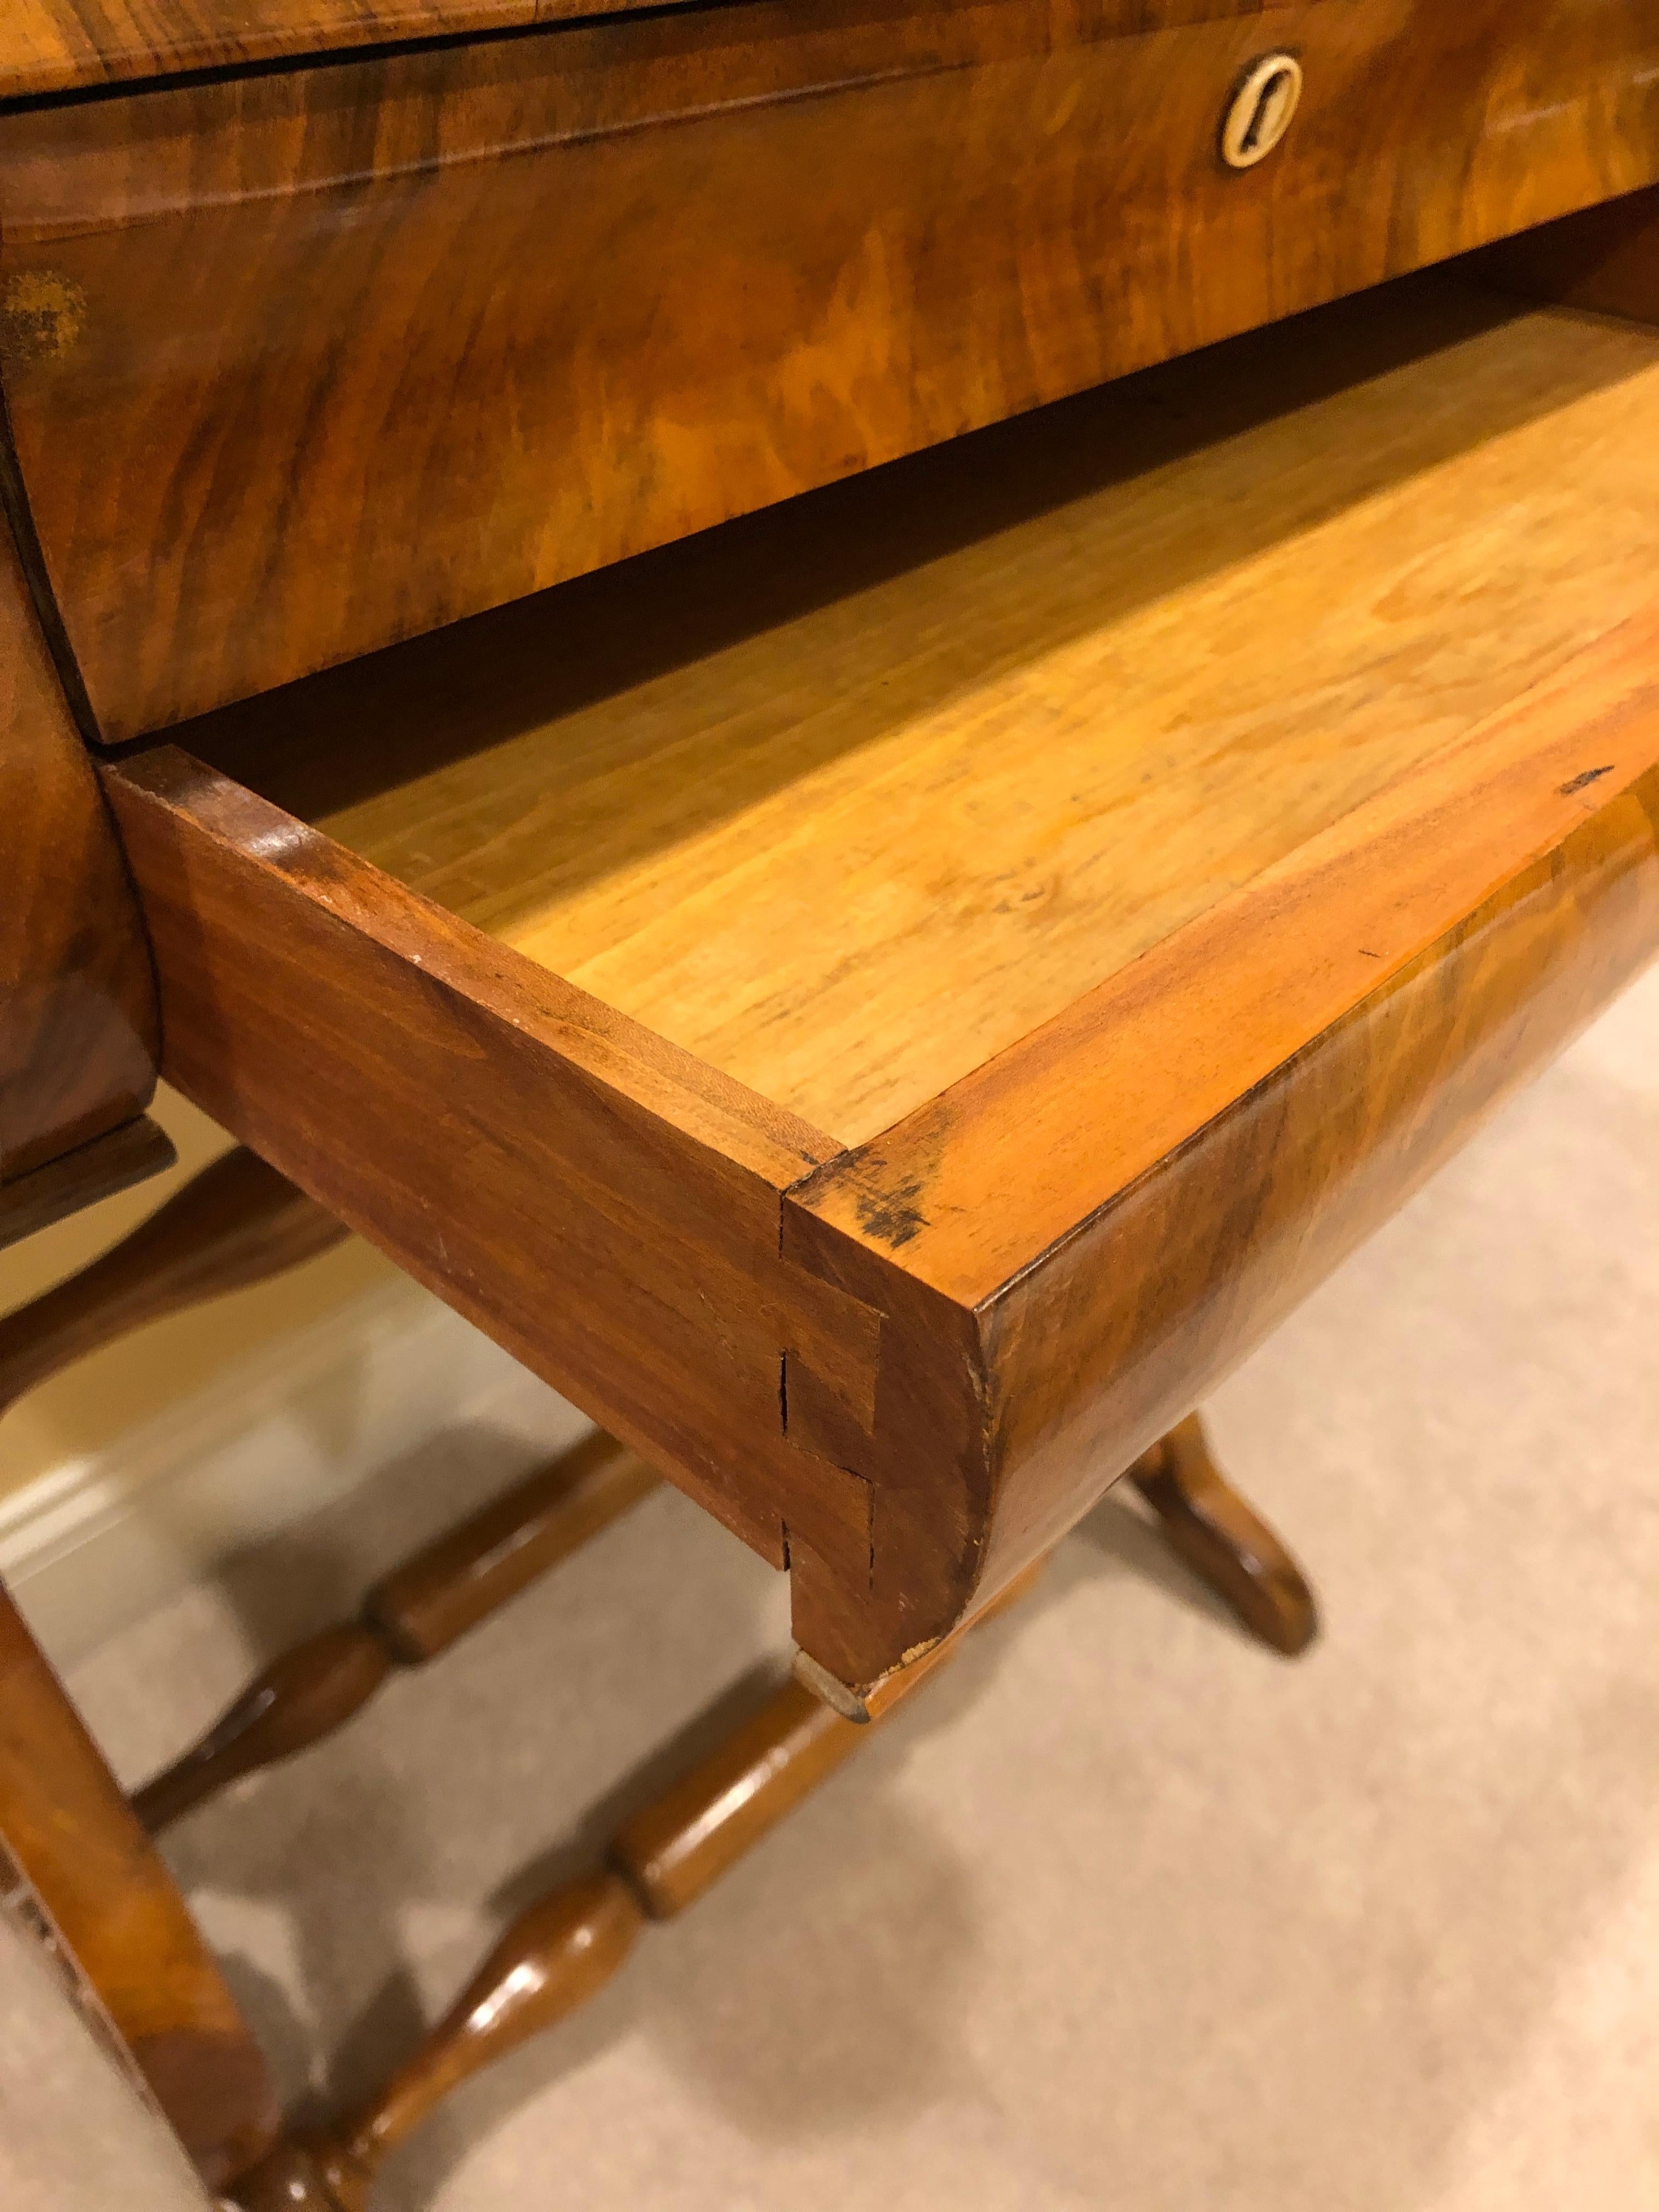 Original Biedermeier sewing table, South German 1820, walnut veneer. Beautiful table with exquisite veneer grain on the top. Two drawers, the upper one with small compartments and a pincushion. The table is in good condition and has a nice patina.